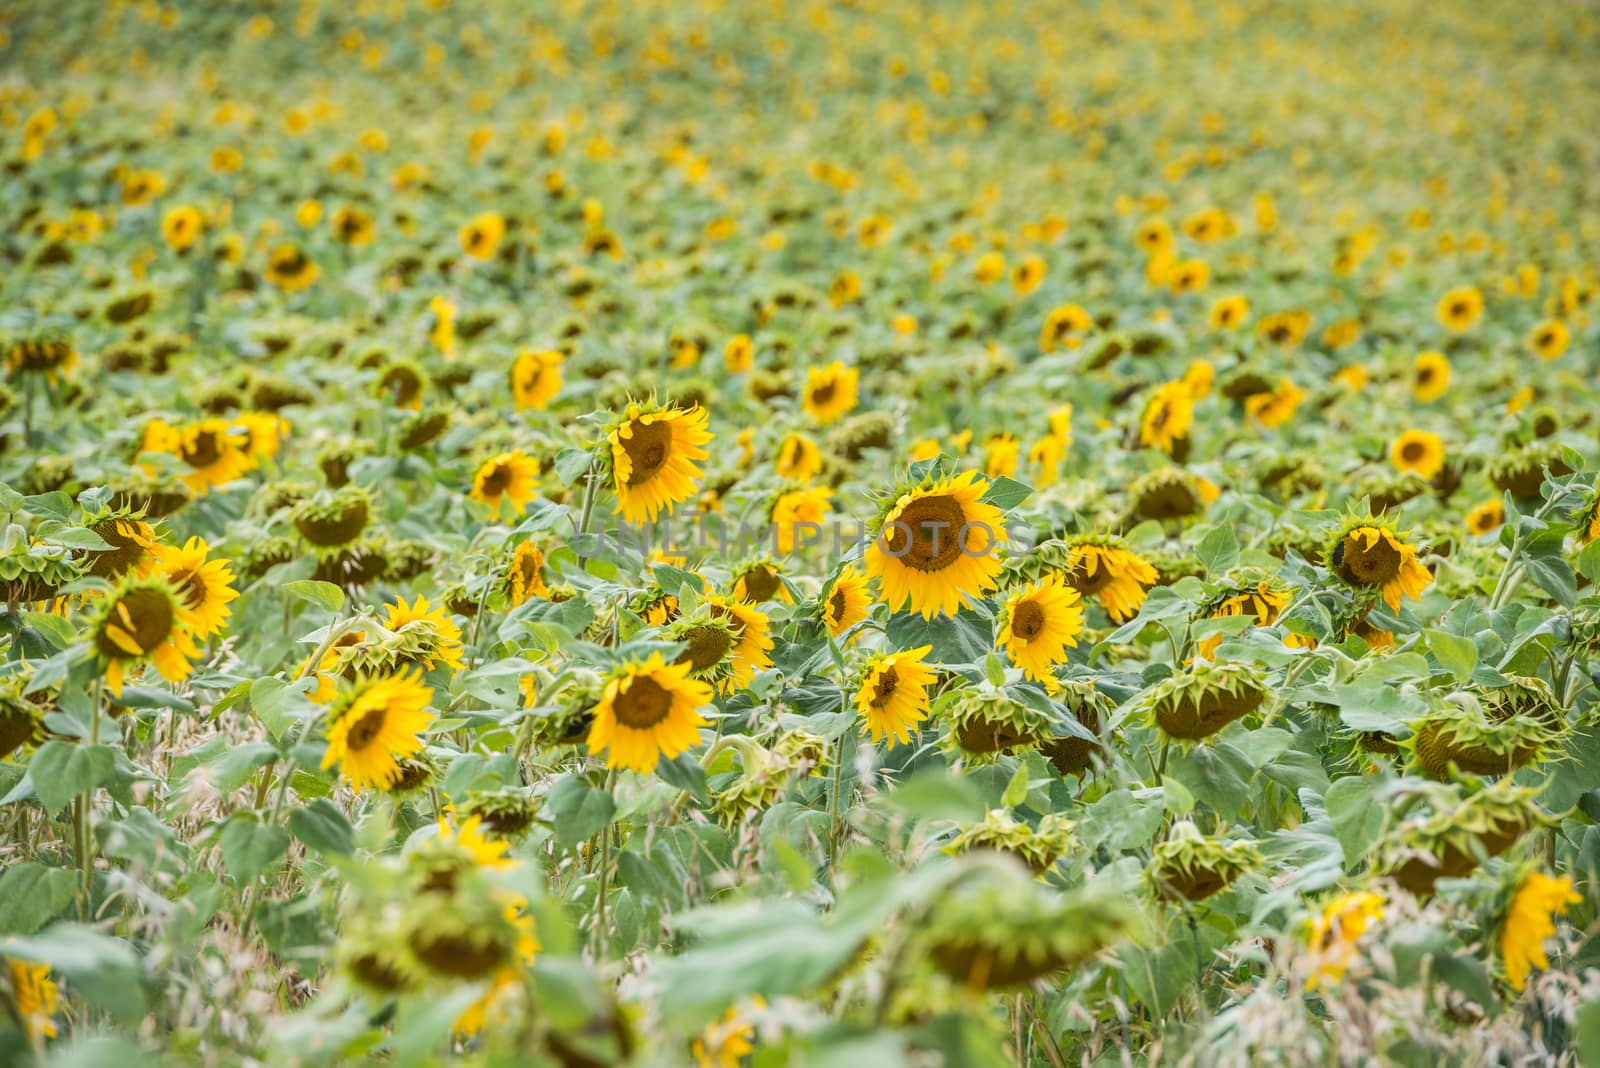 Close up view of a bright yellow sunflower field with opened flowers